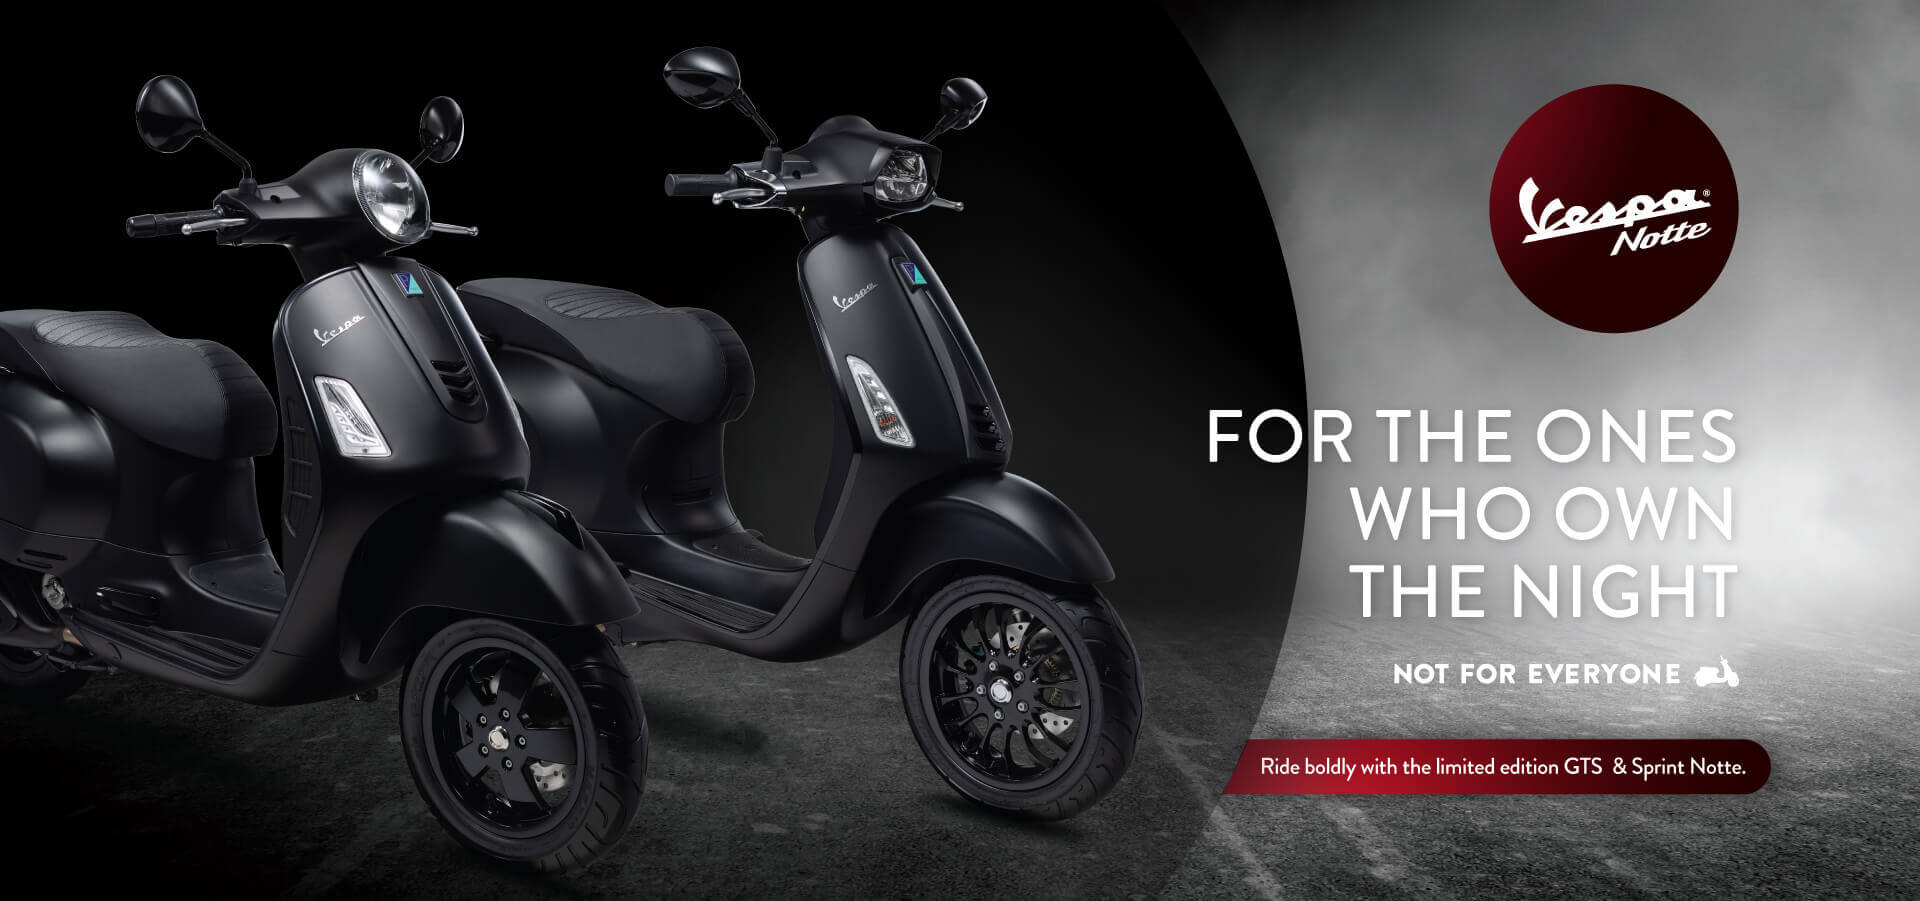 Vespa Notte 125 Price in Chandrapur  Notte 125 On Road Price